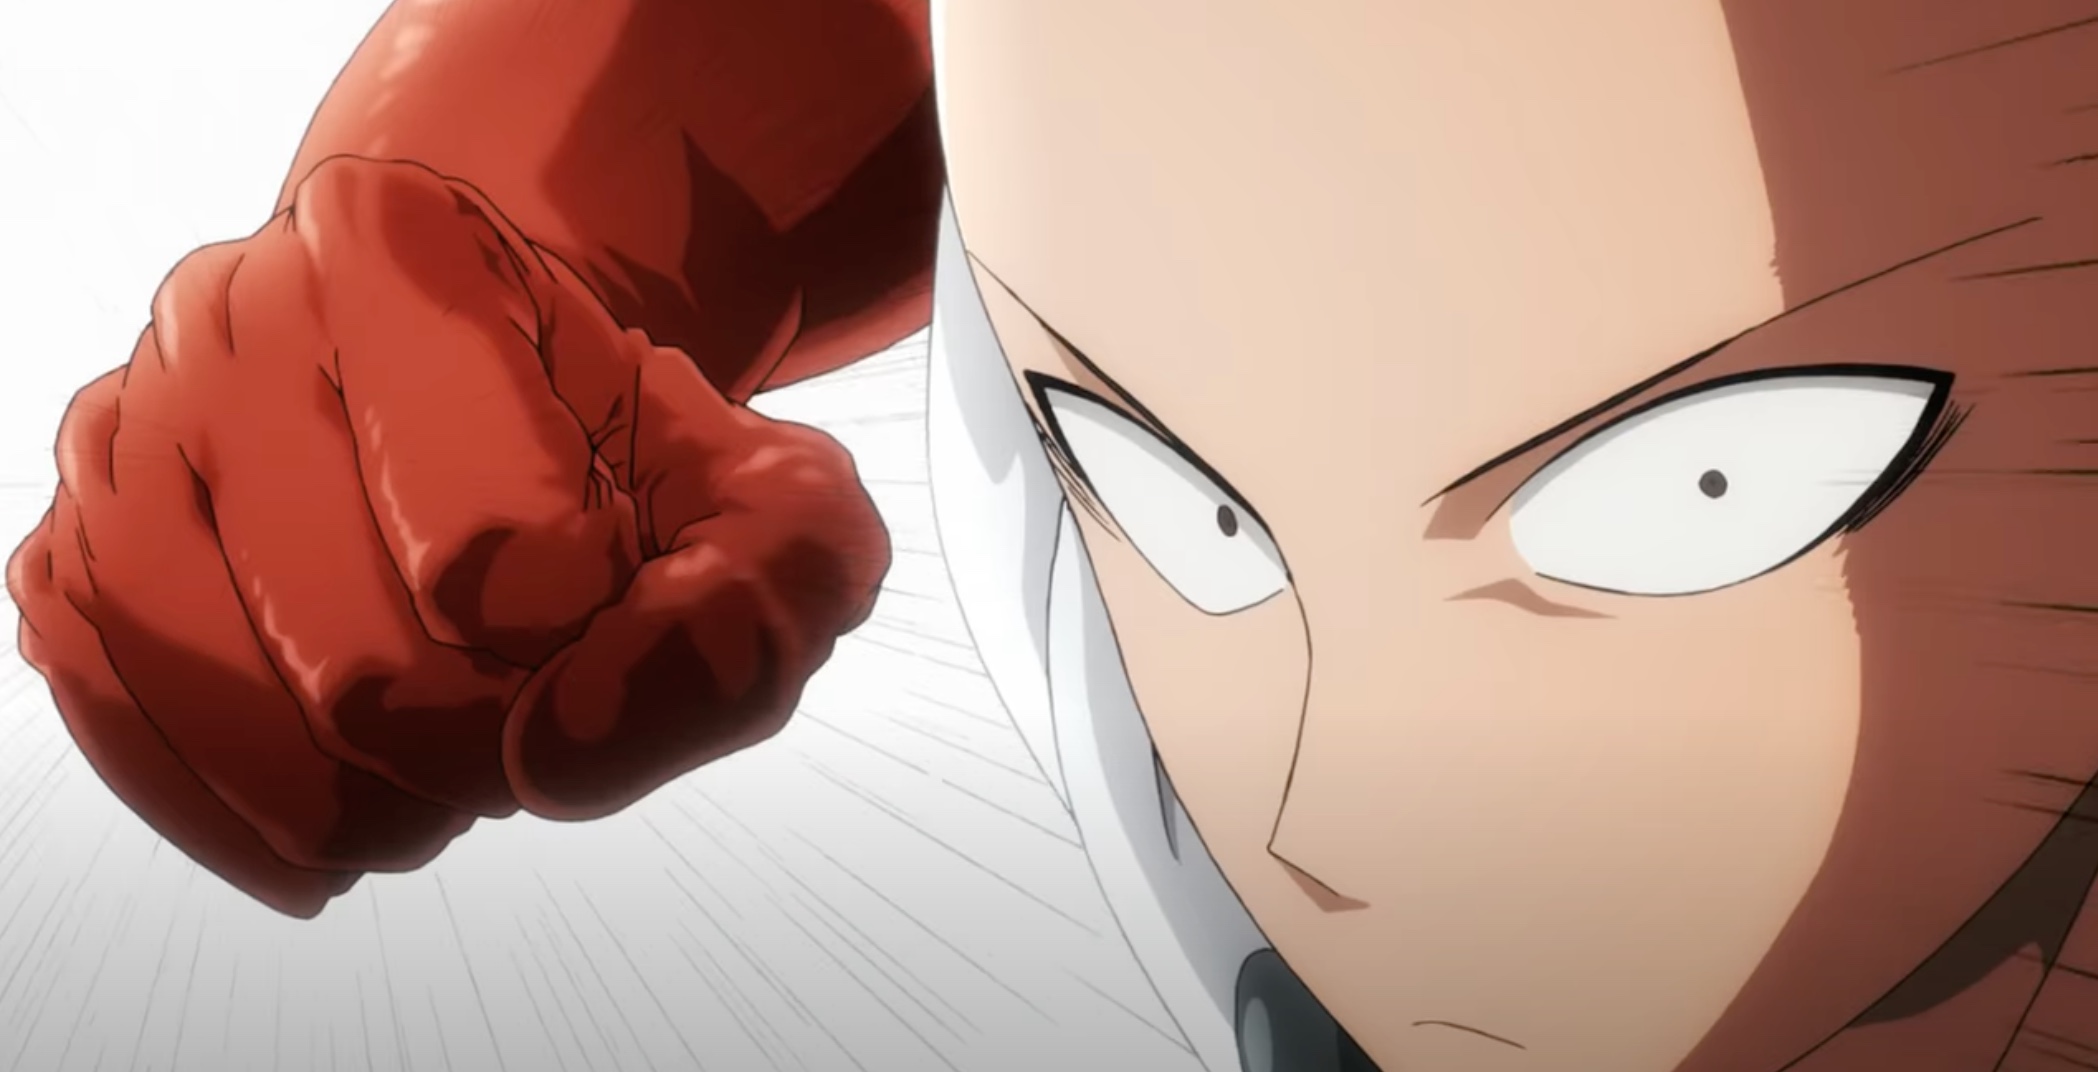 Justin Lin Will Direct Sony's One-Punch Man Live-Action Movie